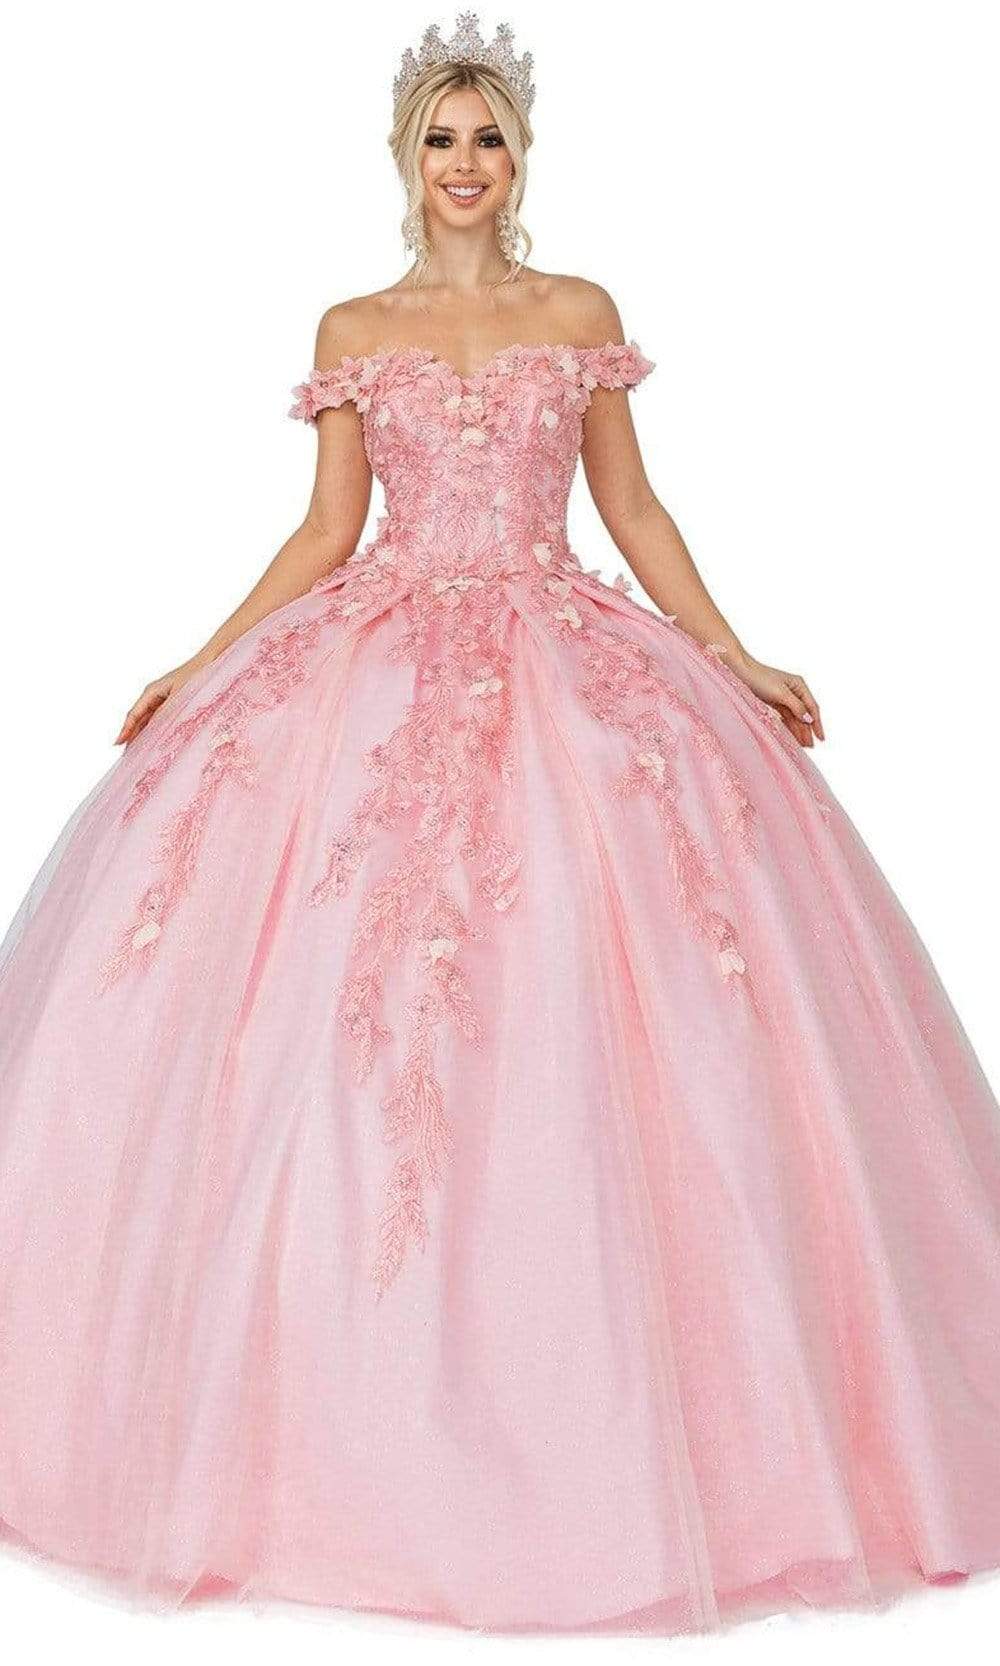 Dancing Queen - 1620 Off Shoulder Floral Ballgown Special Occasion Dress XS / Blush